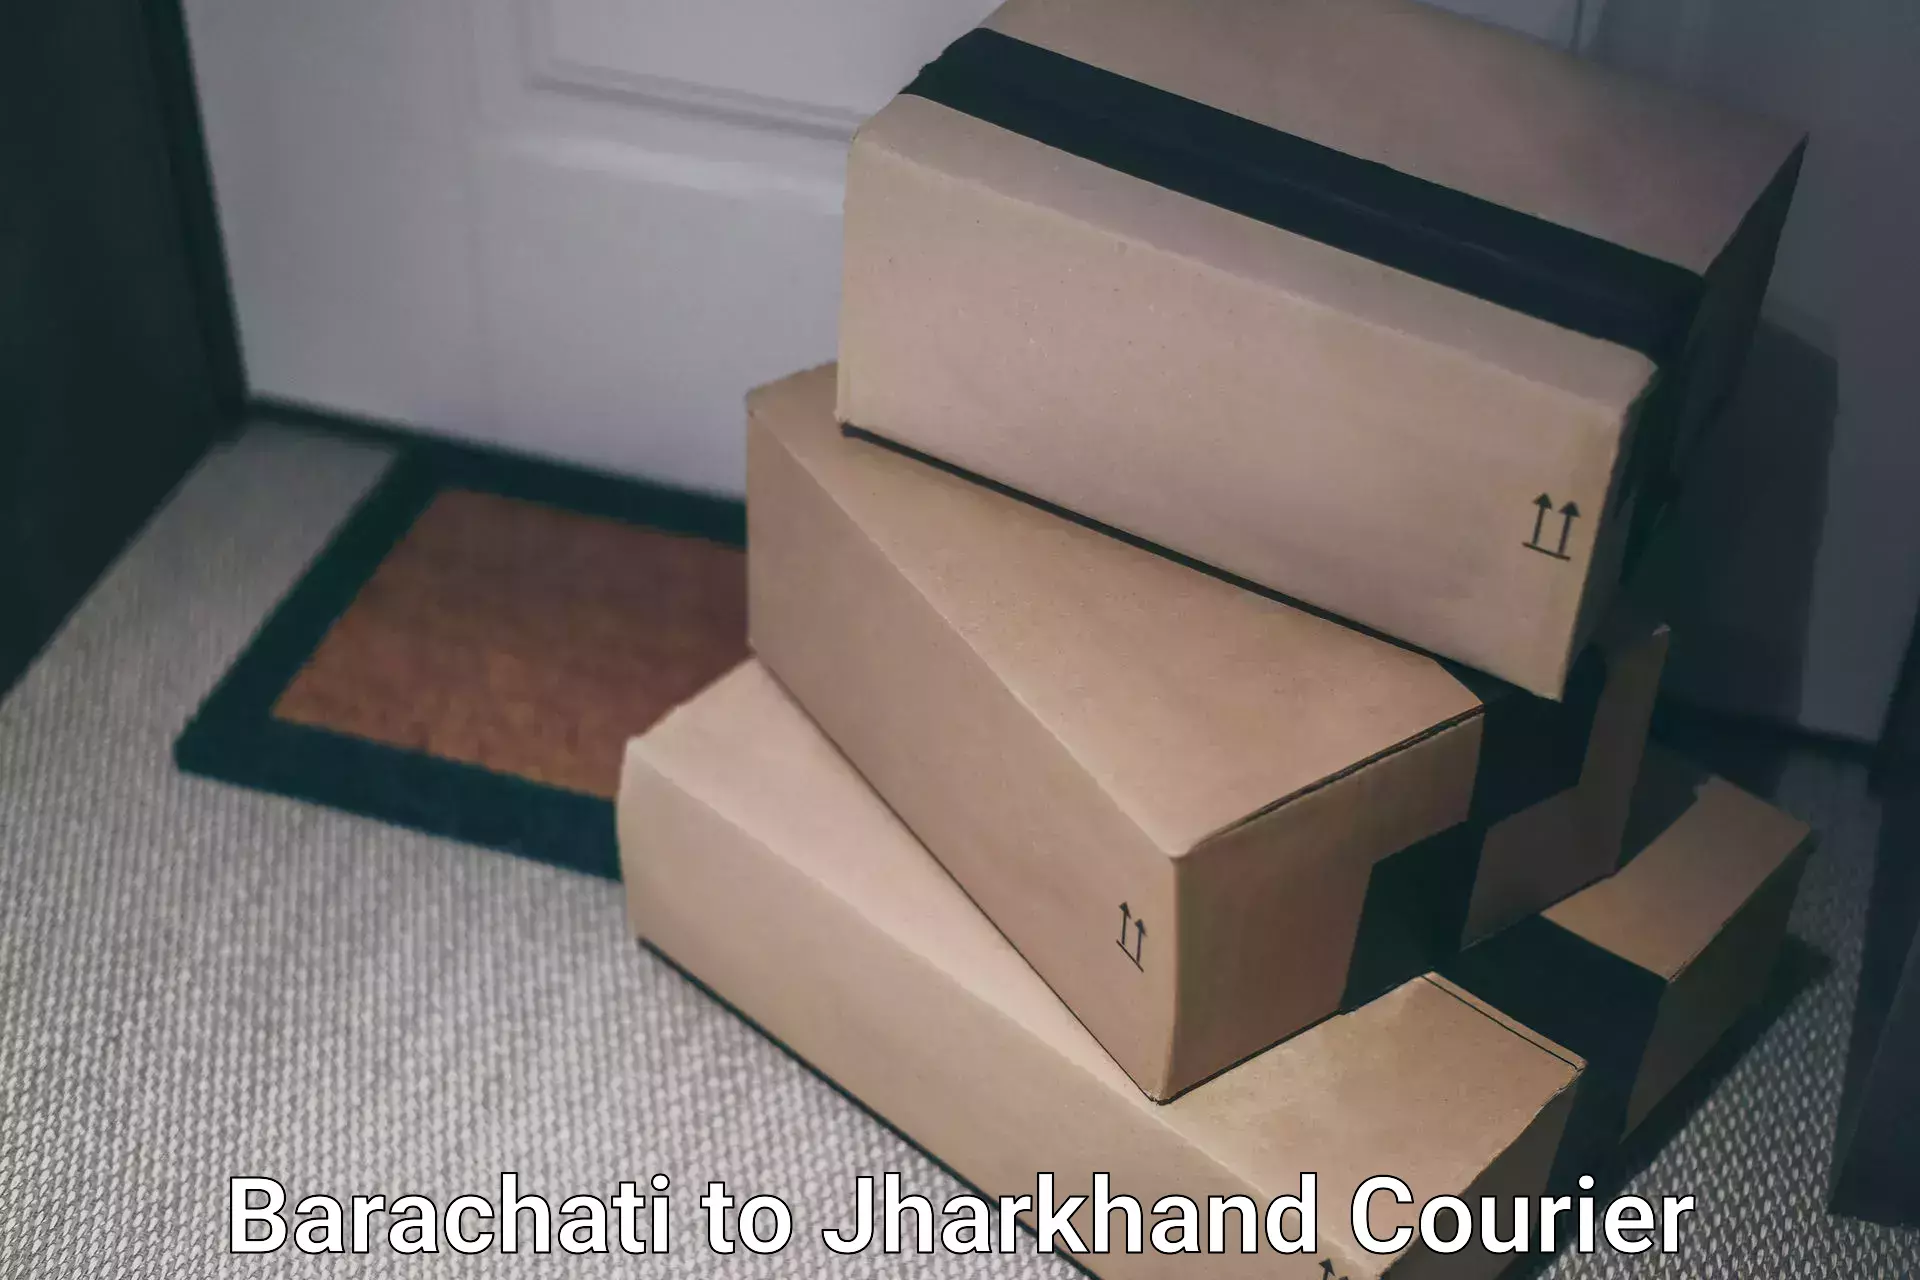 State-of-the-art courier technology Barachati to Bero Ranchi